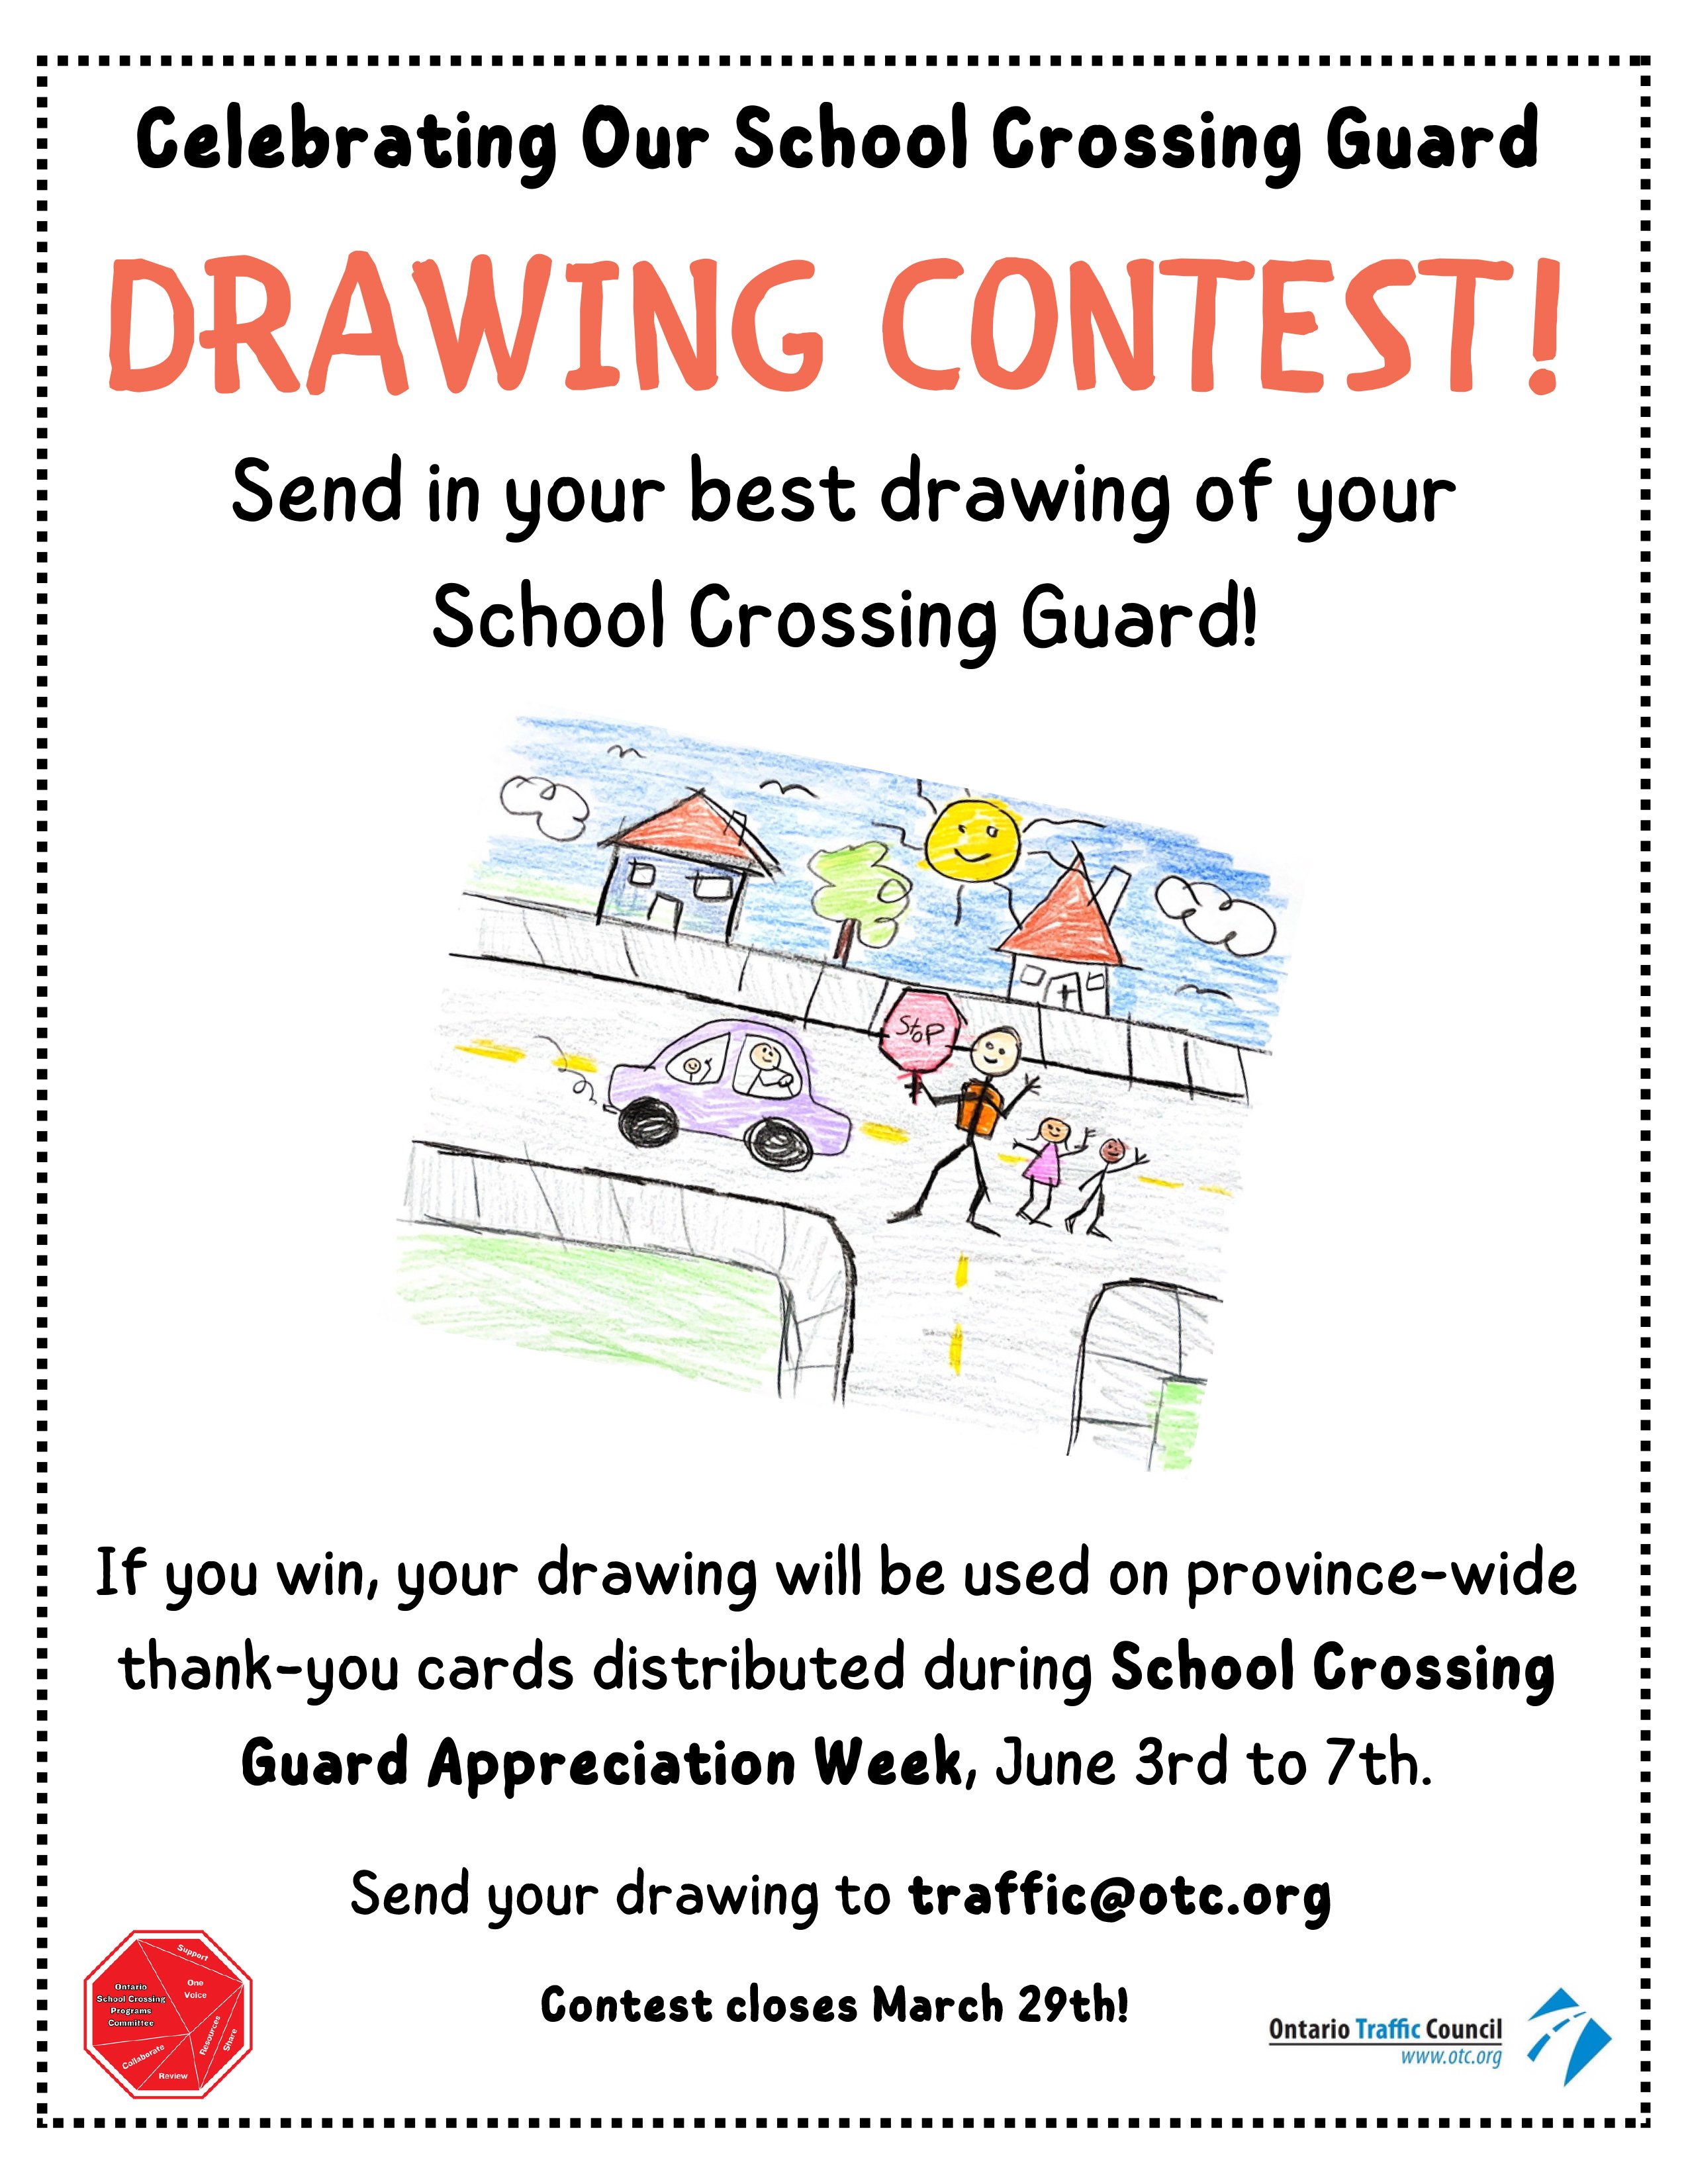 A poster advertising a drawing contest